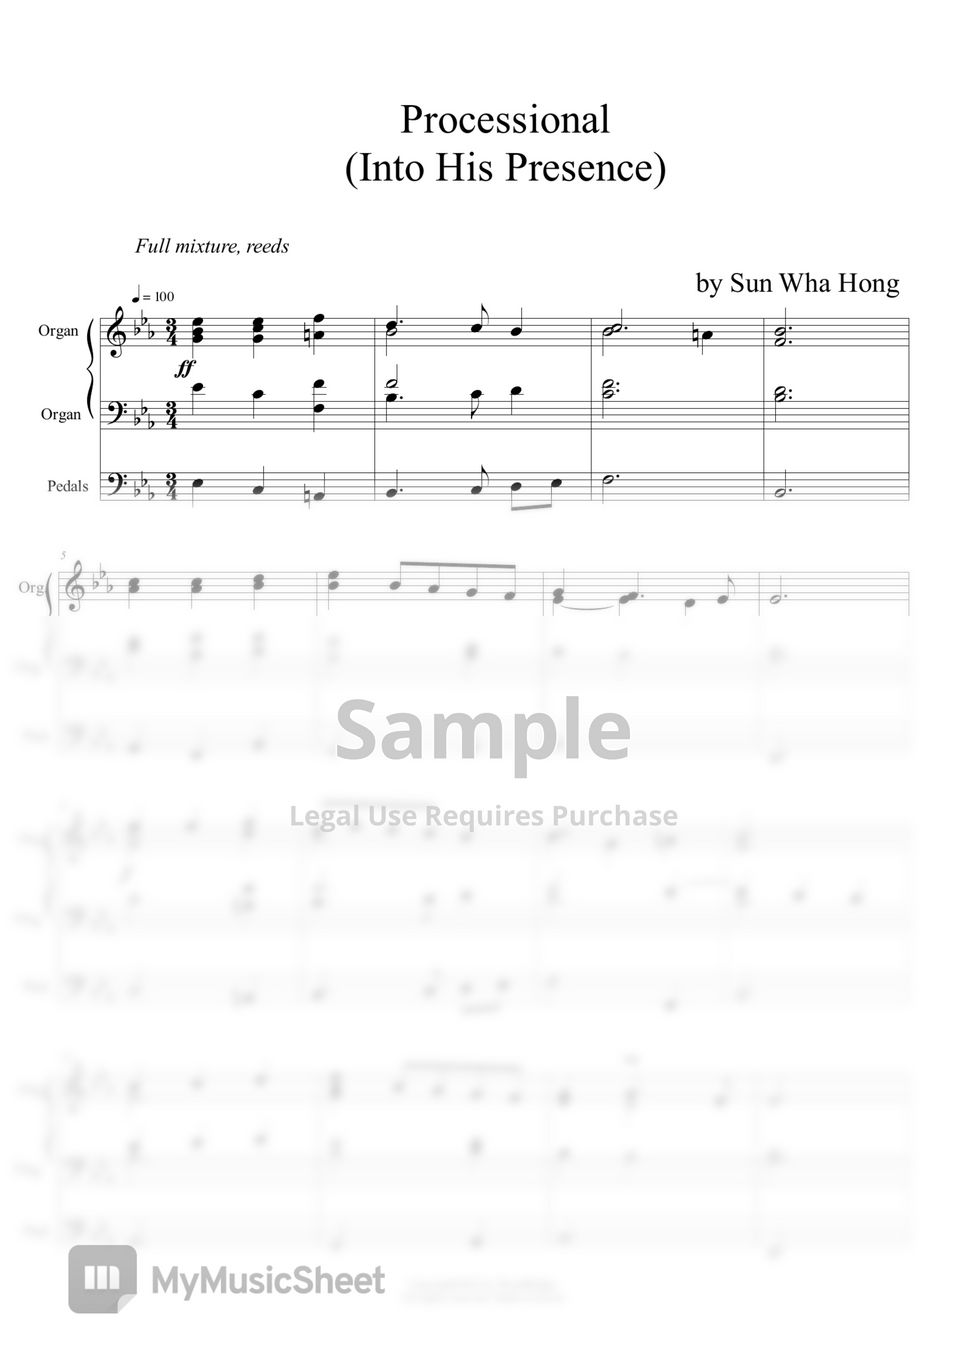 Sun Wha Hong - Processional (Into His Presence) (self-composed)